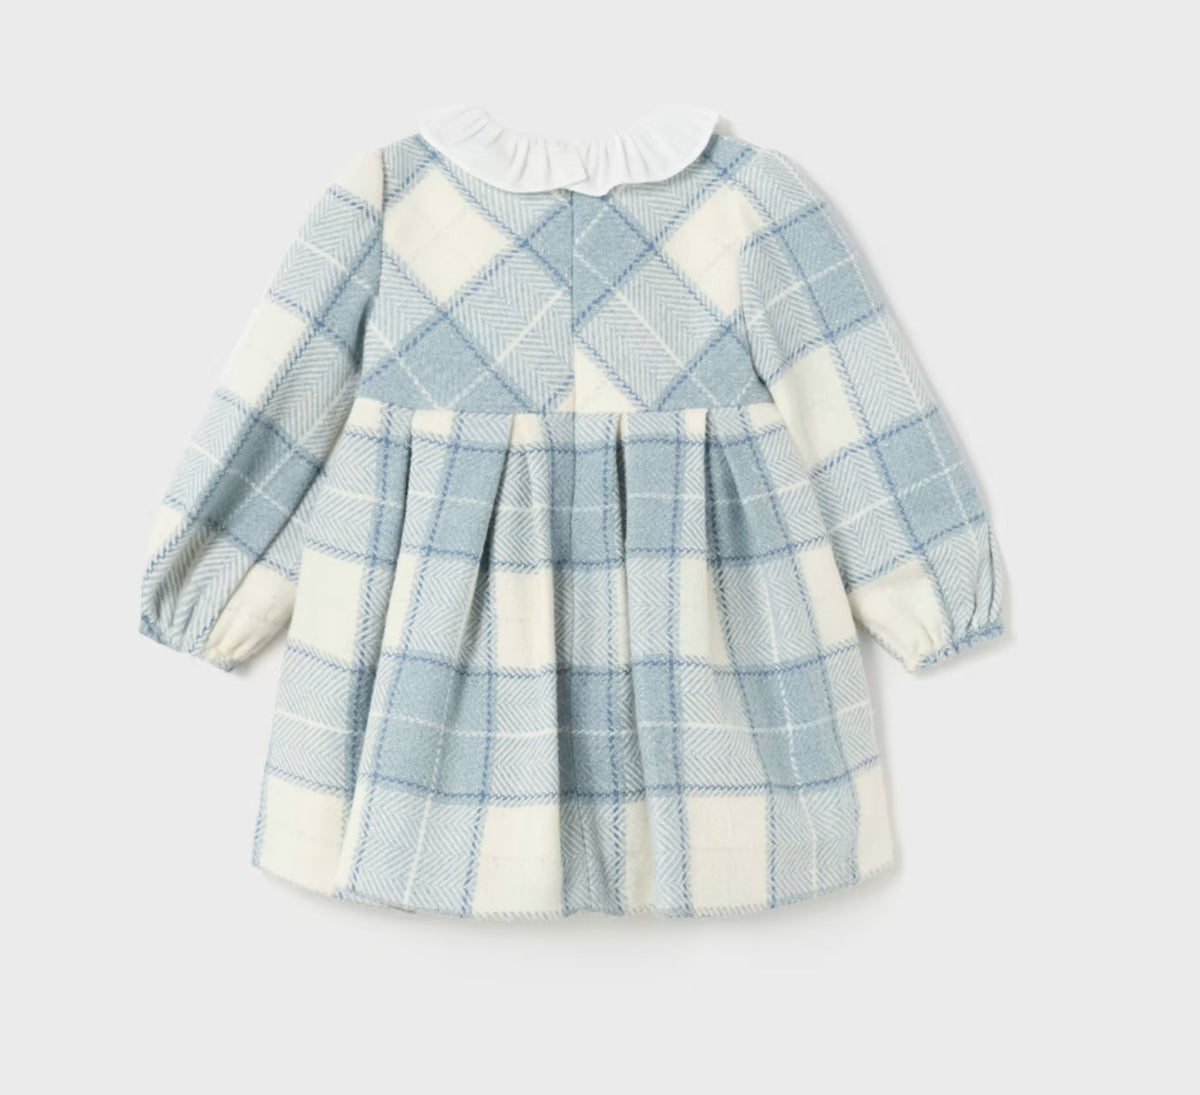 Melario Cupcake Princess Polly Gingham Dress For Girls Fashionable Kids  Clothes From Europe And The American Perfect For Childrens Birthday Style  210412 From Kong06, $10.34